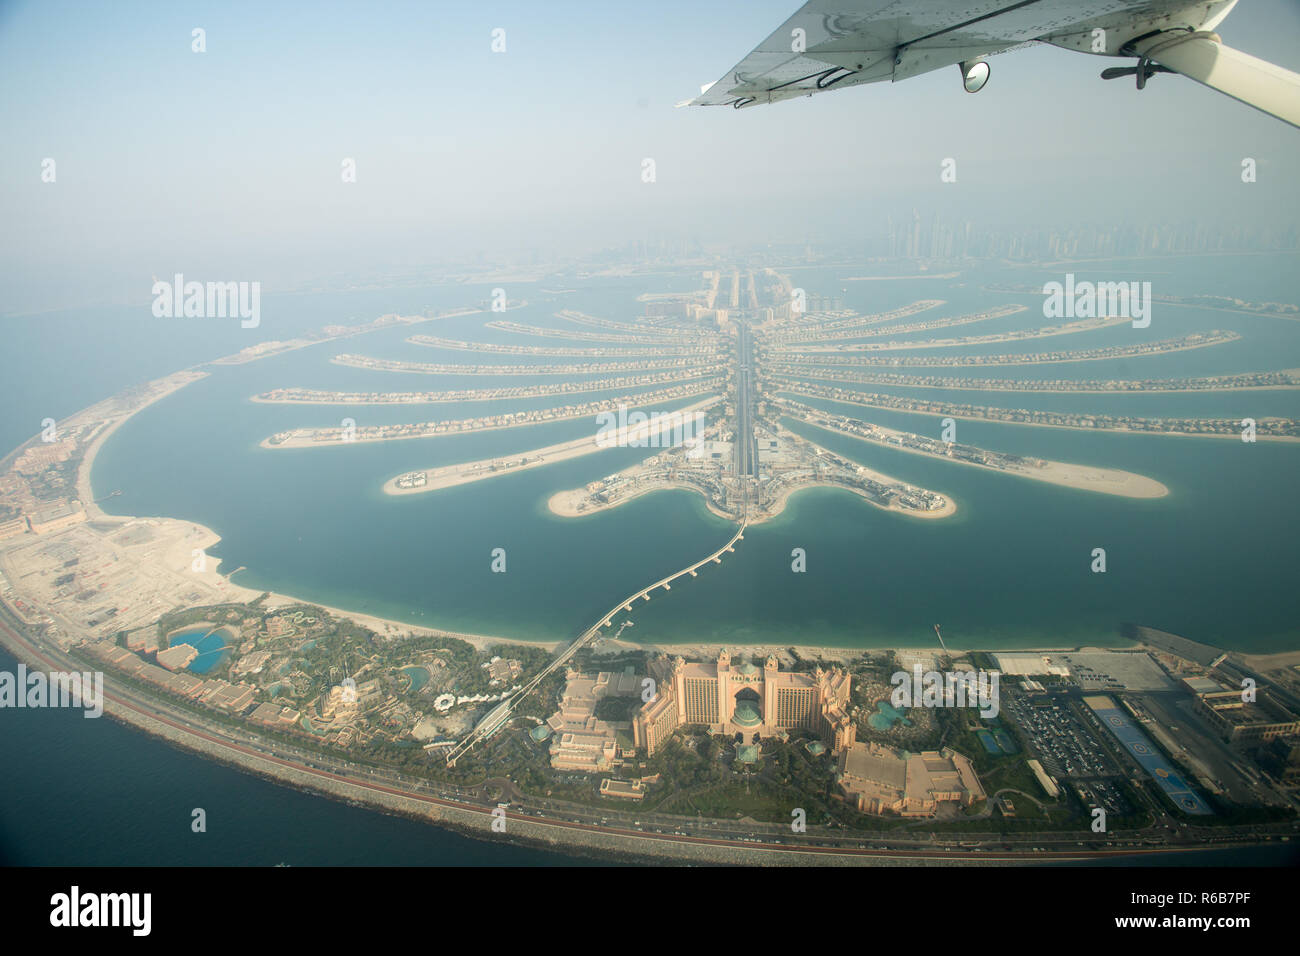 Palm Jumeirah and Atlantis Hotel as seen from a Seaplane Flight in Dubai, United Arab Emirates. Stock Photo